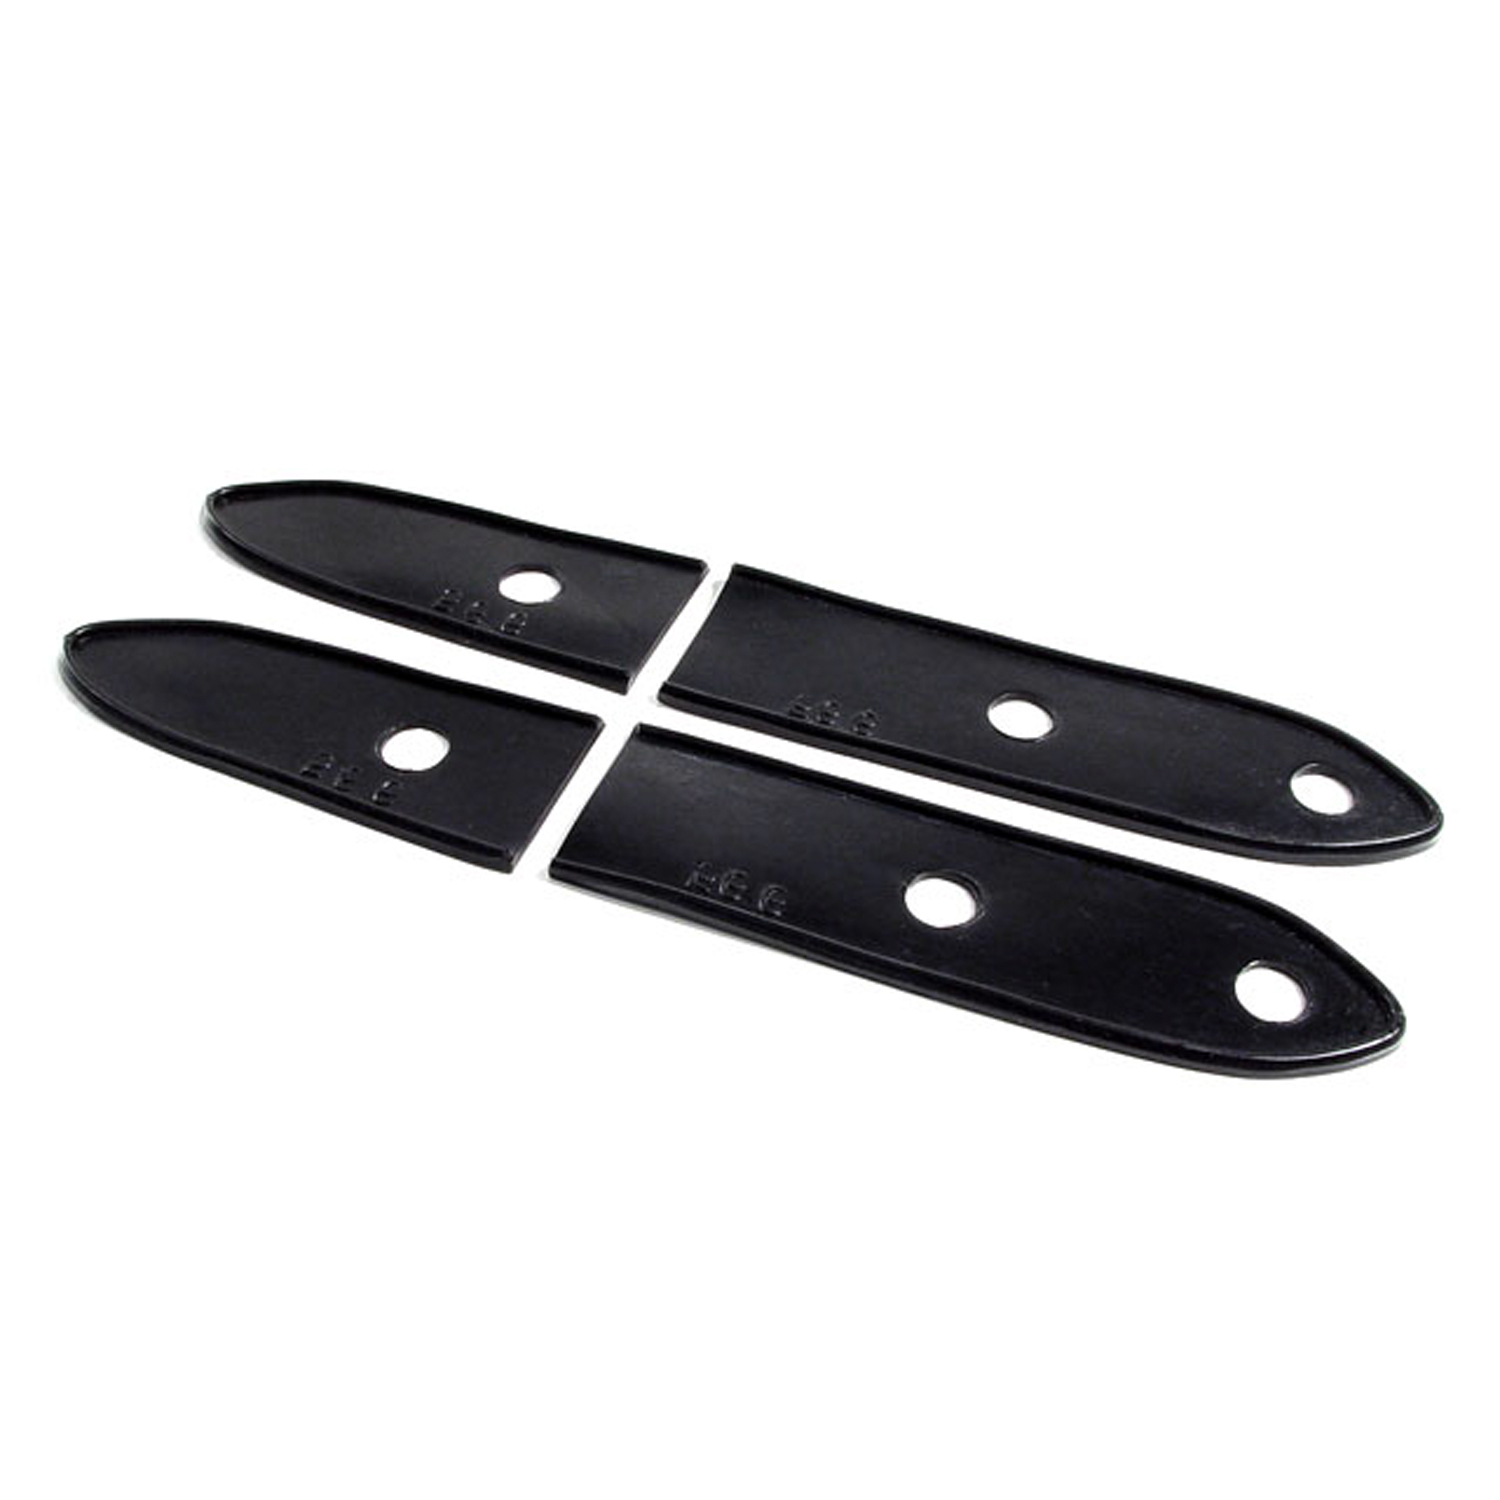 1936 Chrysler Imperial Airflow Trunk Hinge Pads.  1-3/8 wide X 8-5/8 long.  4-Piece Set-MP 566